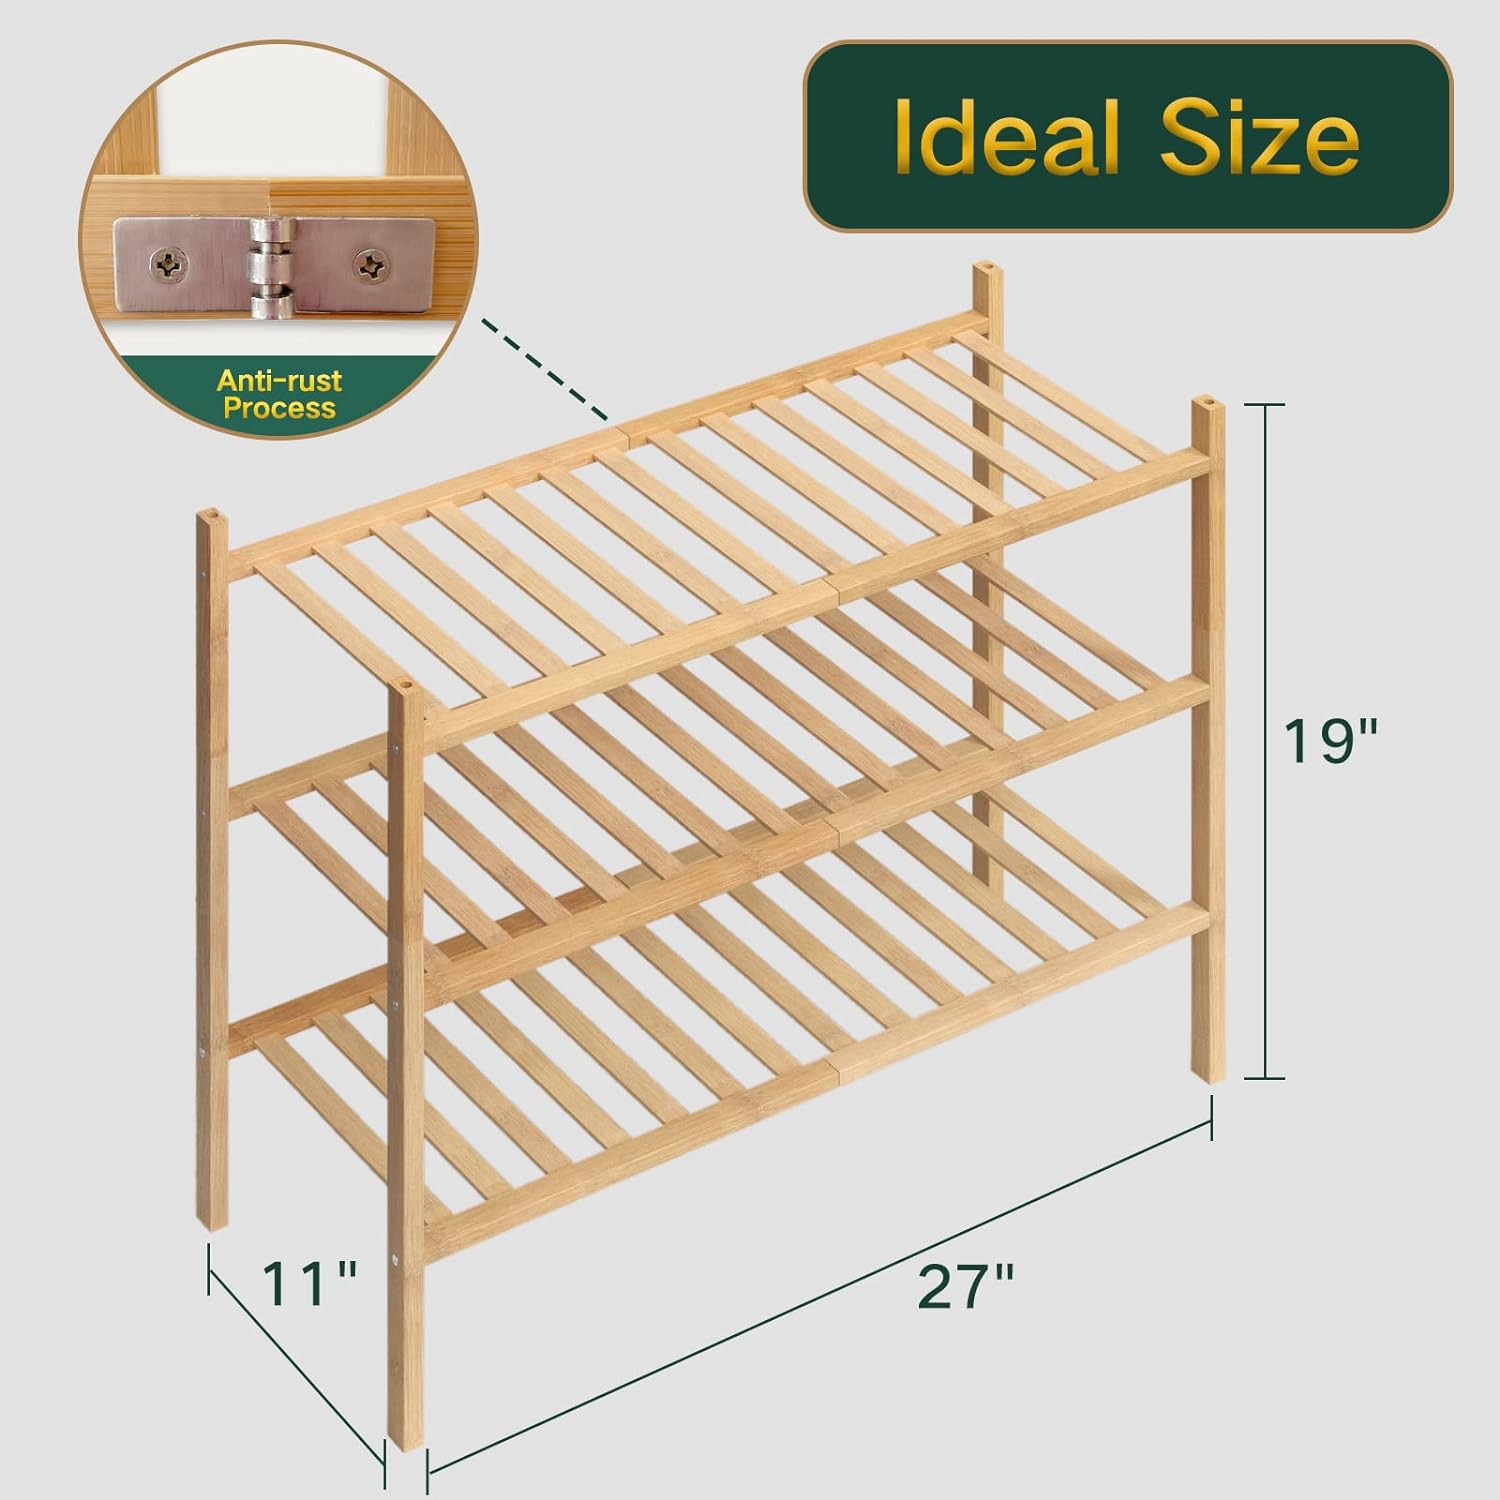 Z&L HOUSE 3-Tier Bamboo Shoe Rack dimensions